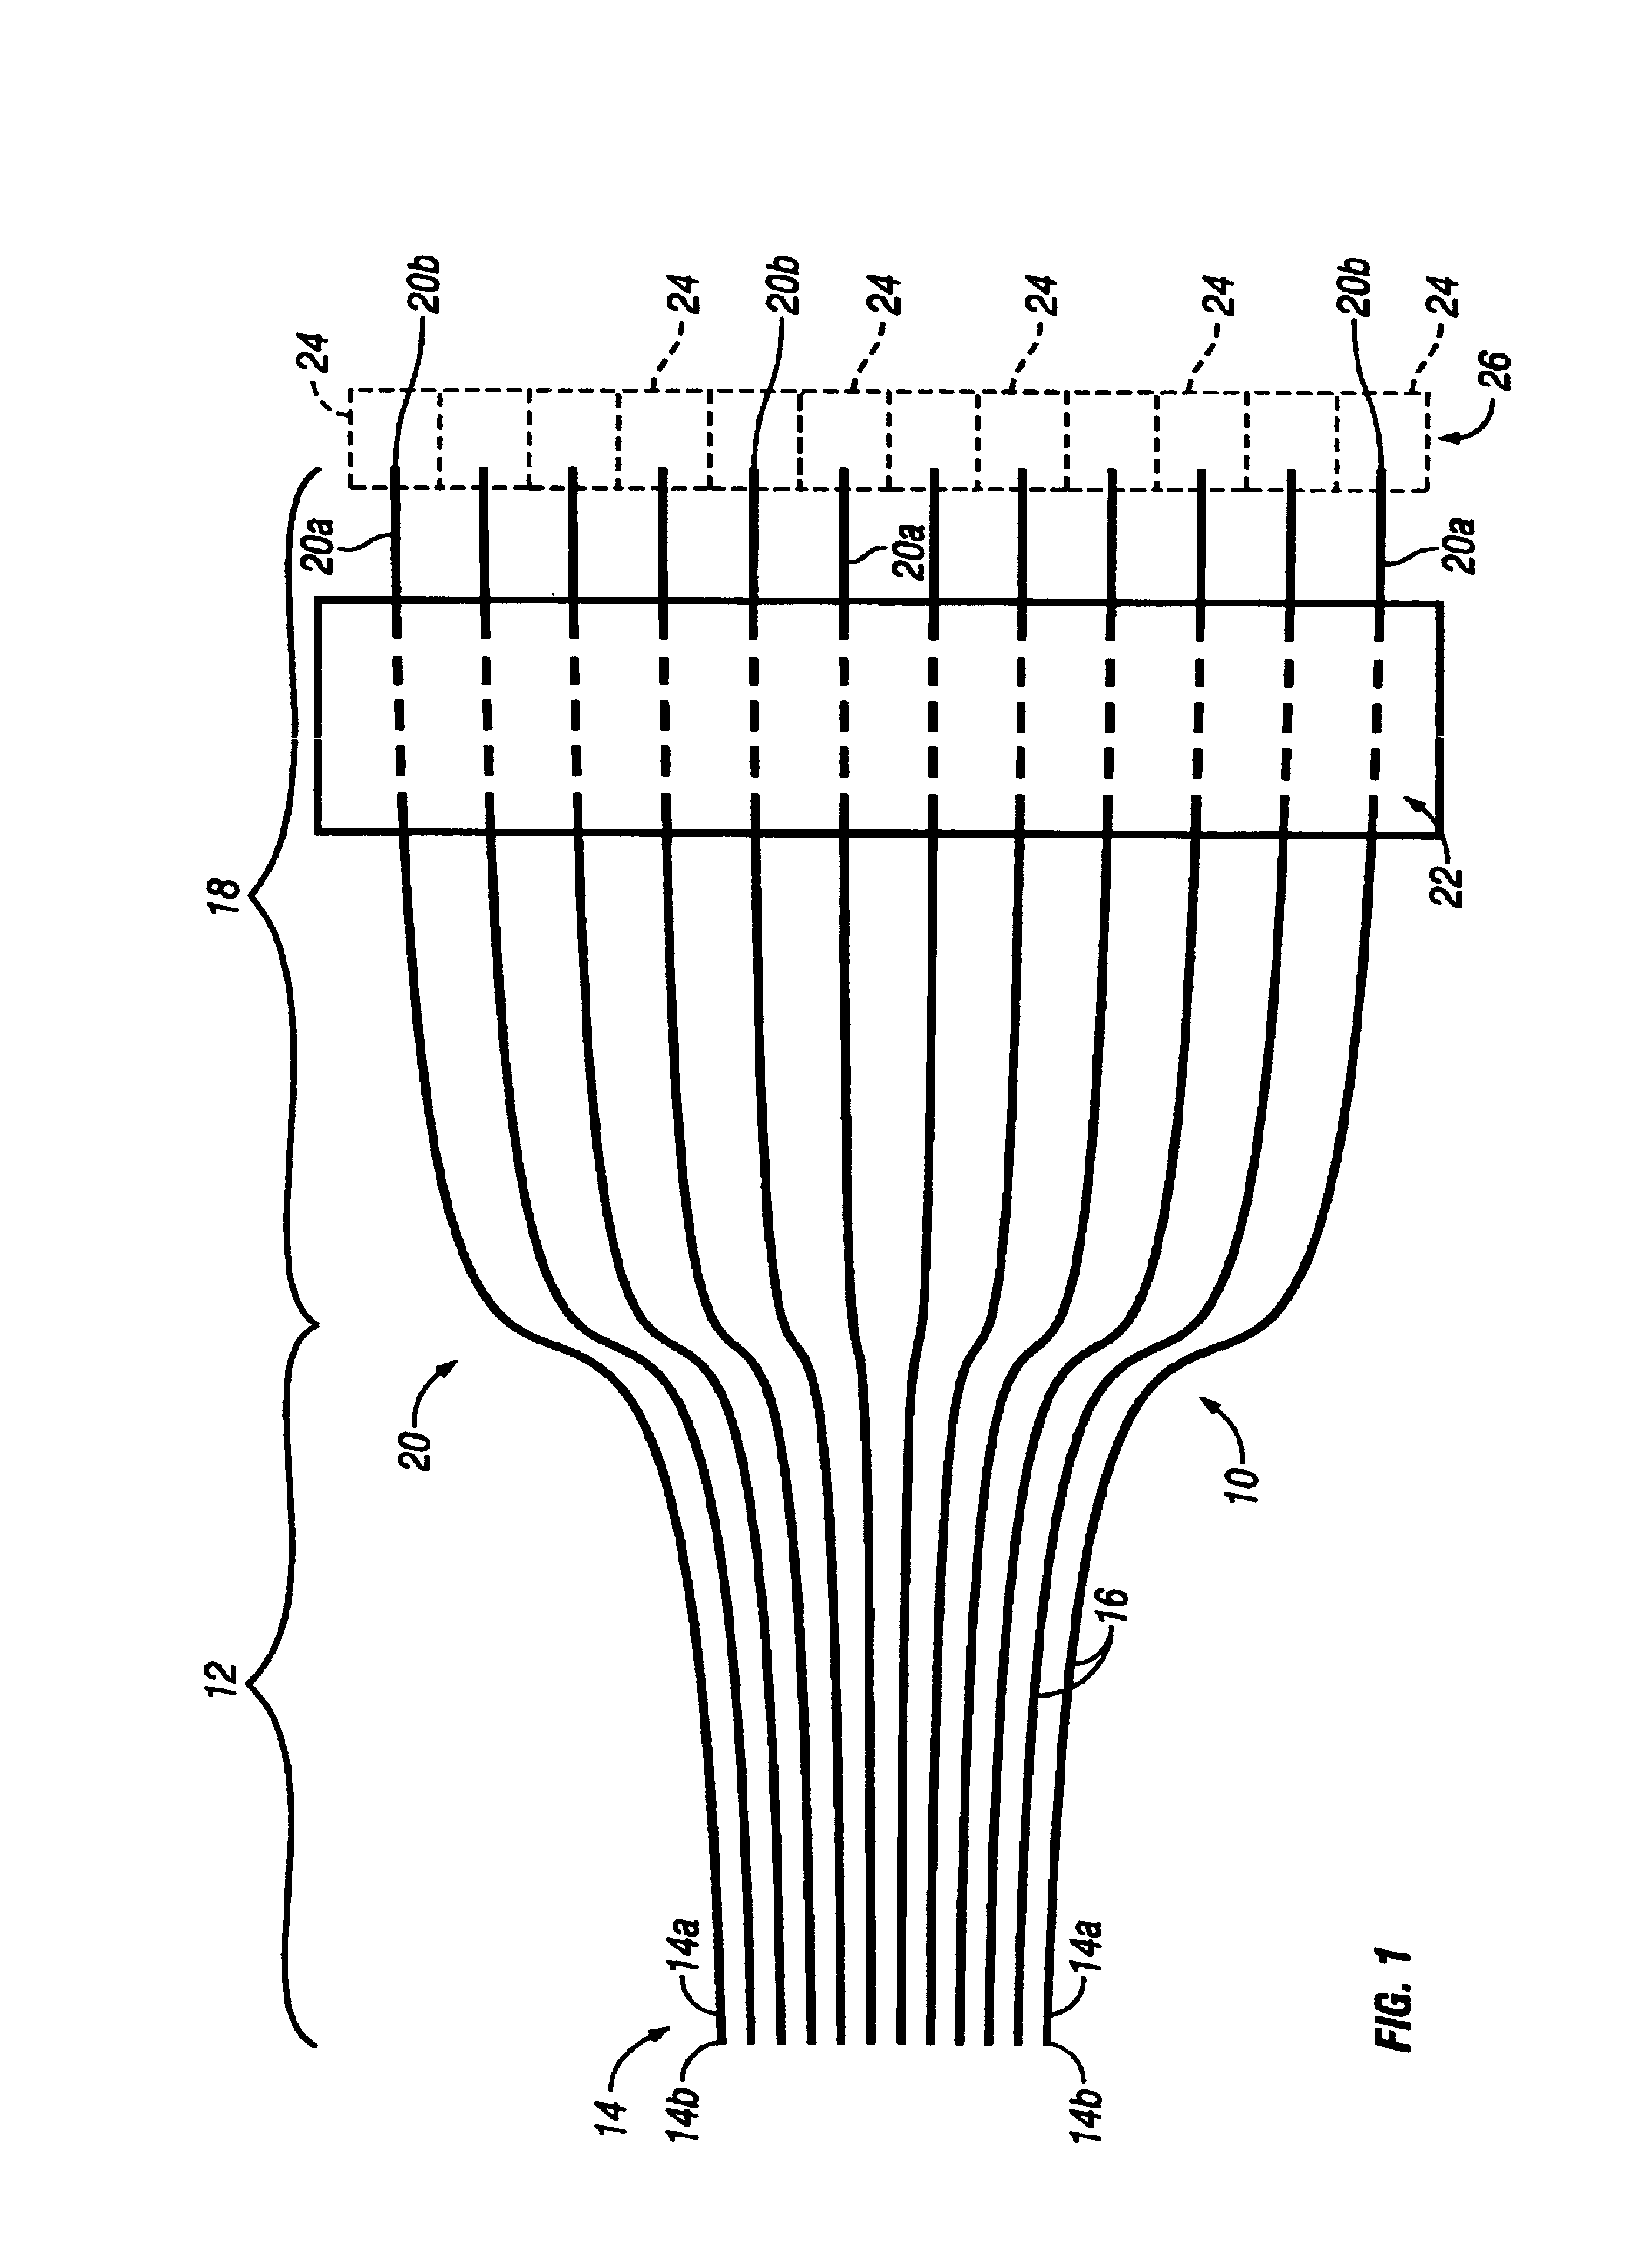 Parallel fiber-fan-out optical interconnect for fiber optic system